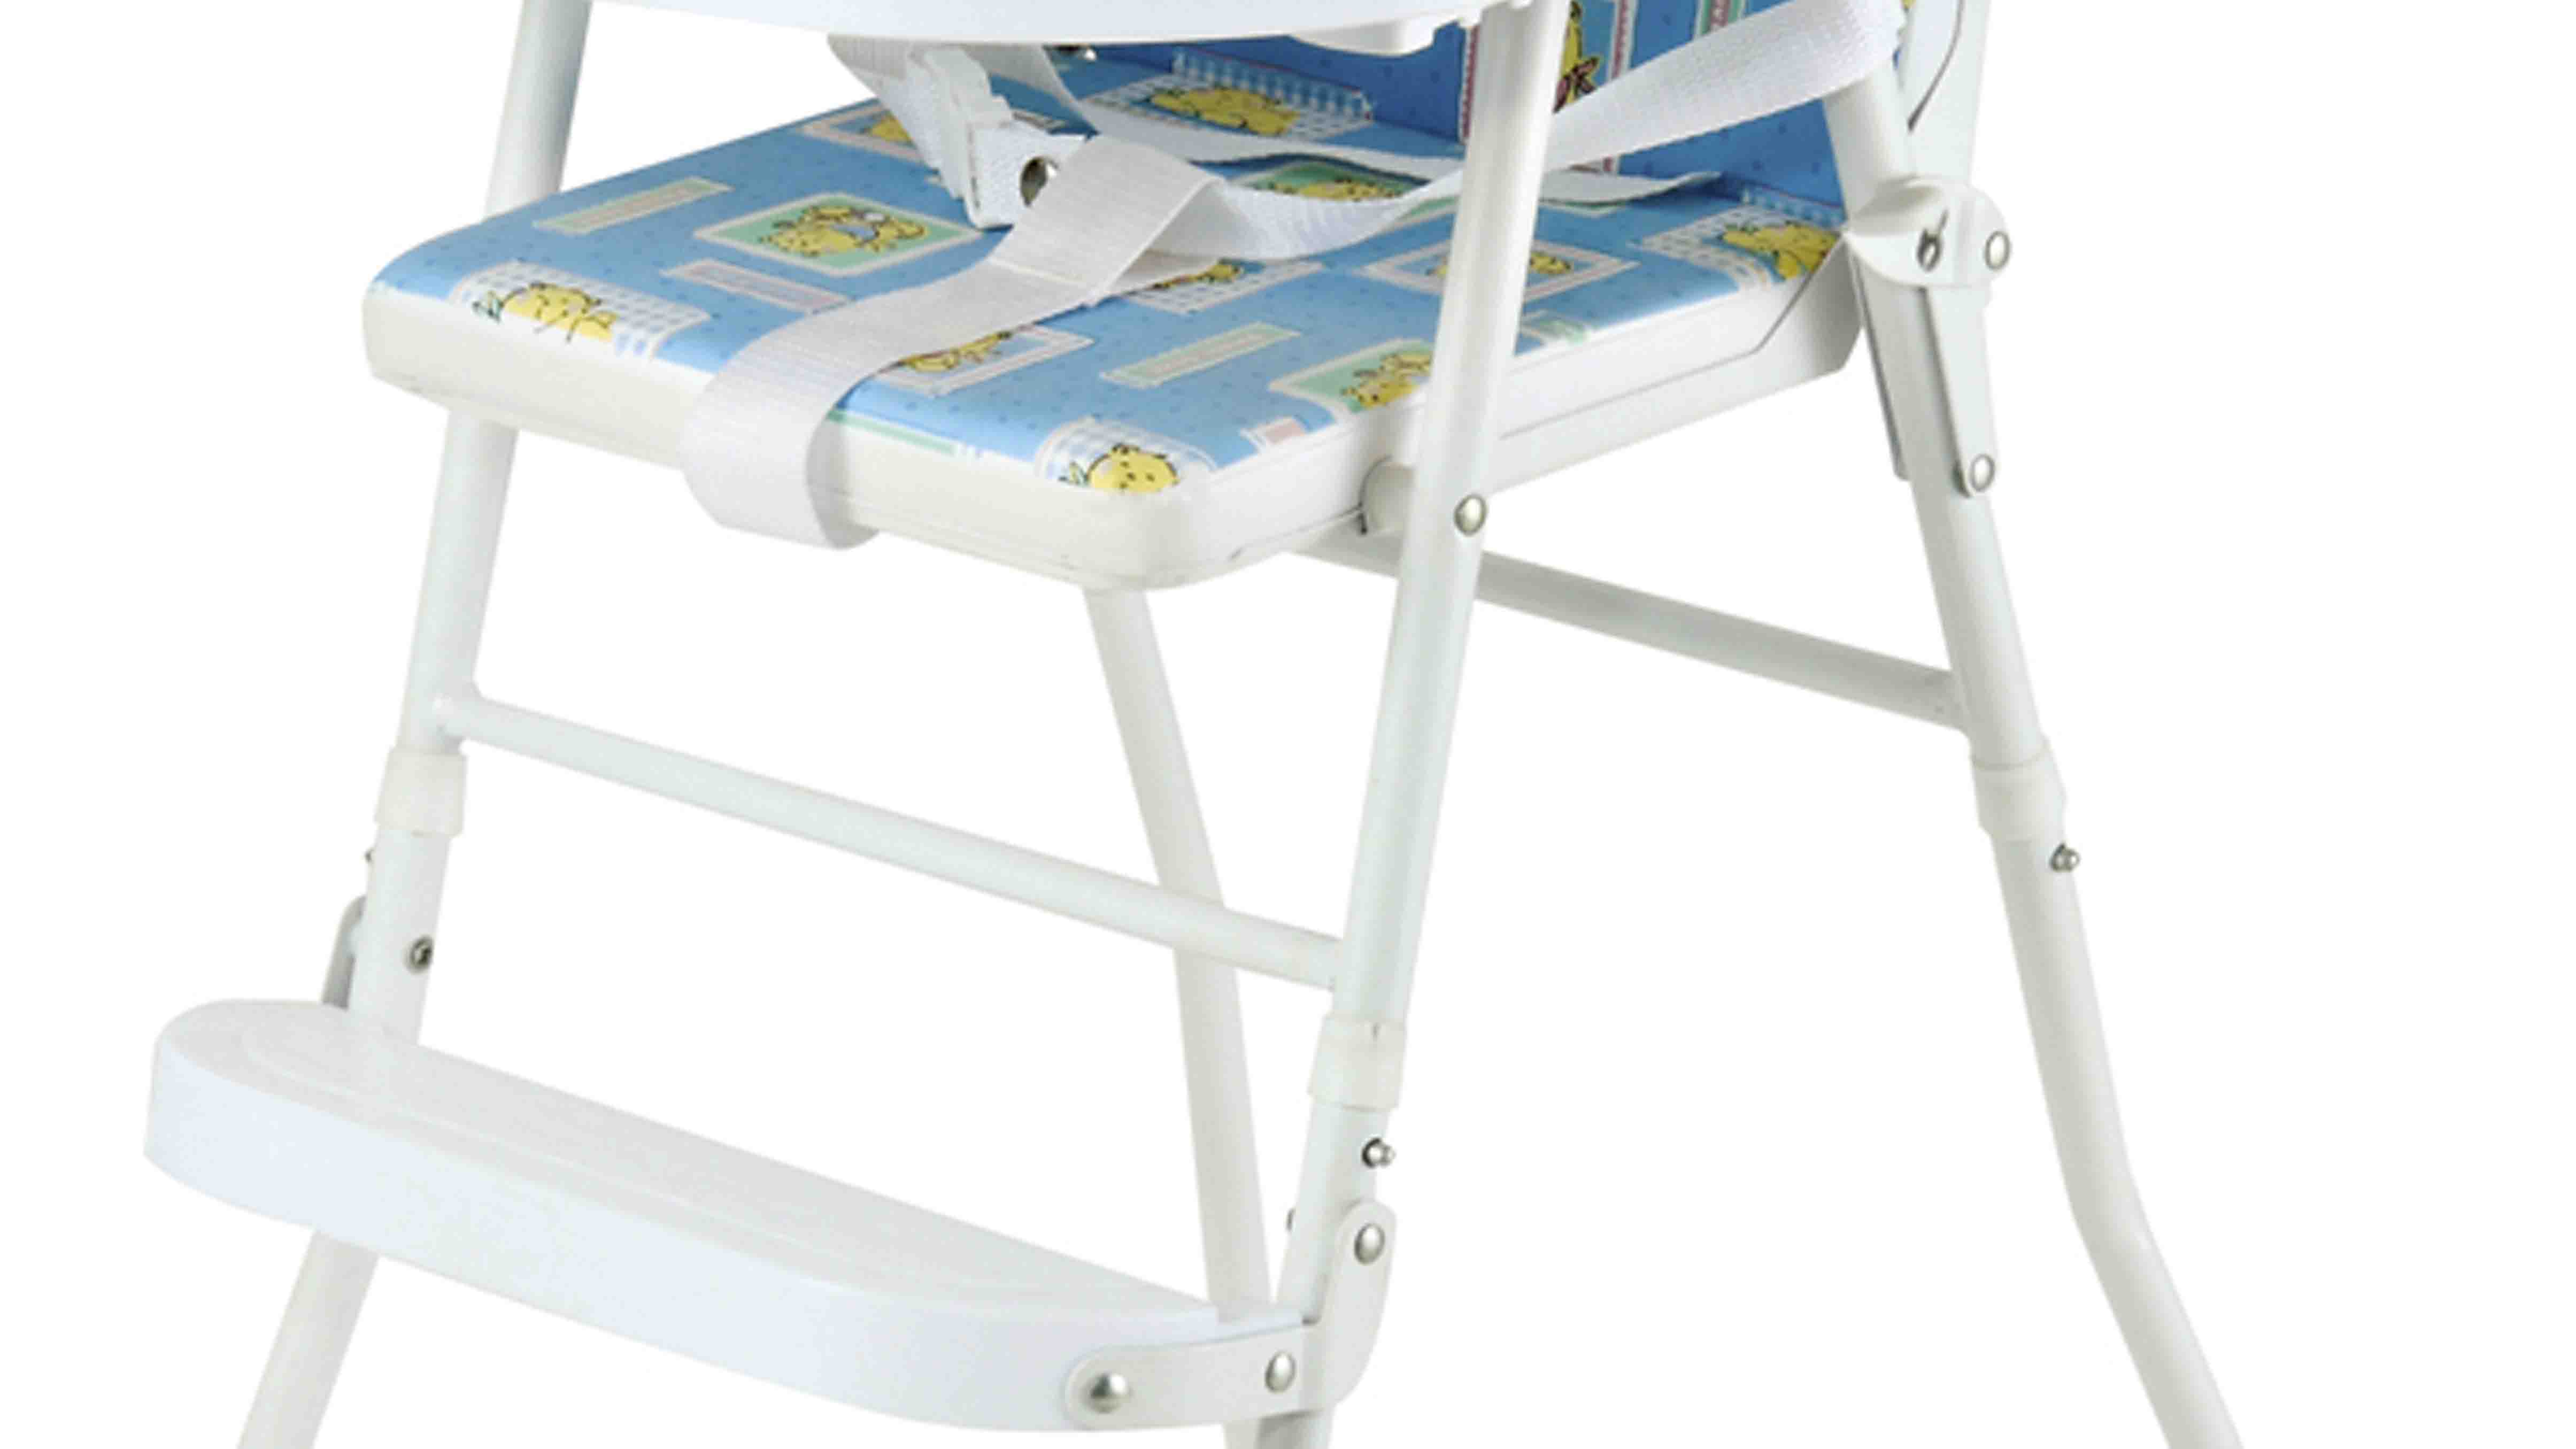 plastic cheap baby high chair series for home